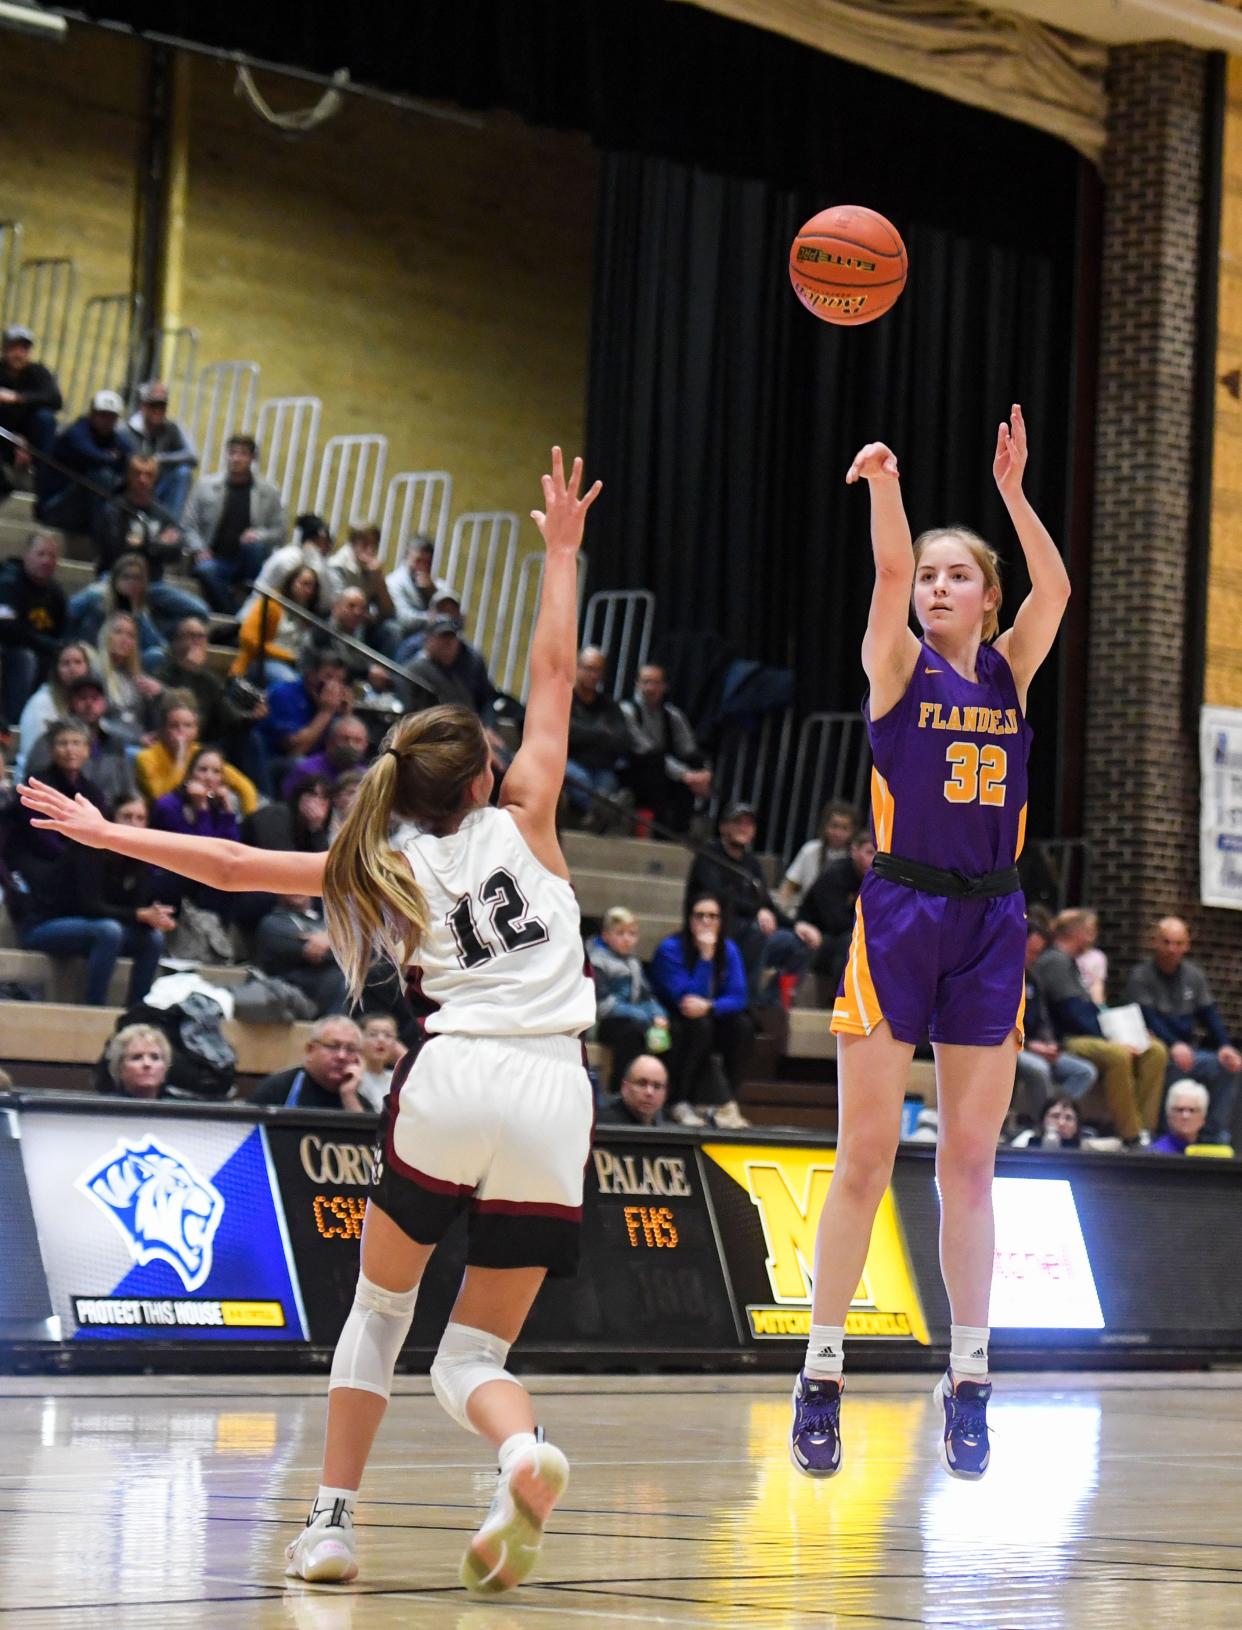 Flandreau's Claire Sheppard shoots a three-pointer on Saturday, January 15, 2022, in the Girls Hanson Classic at the Corn Palace in Mitchell.